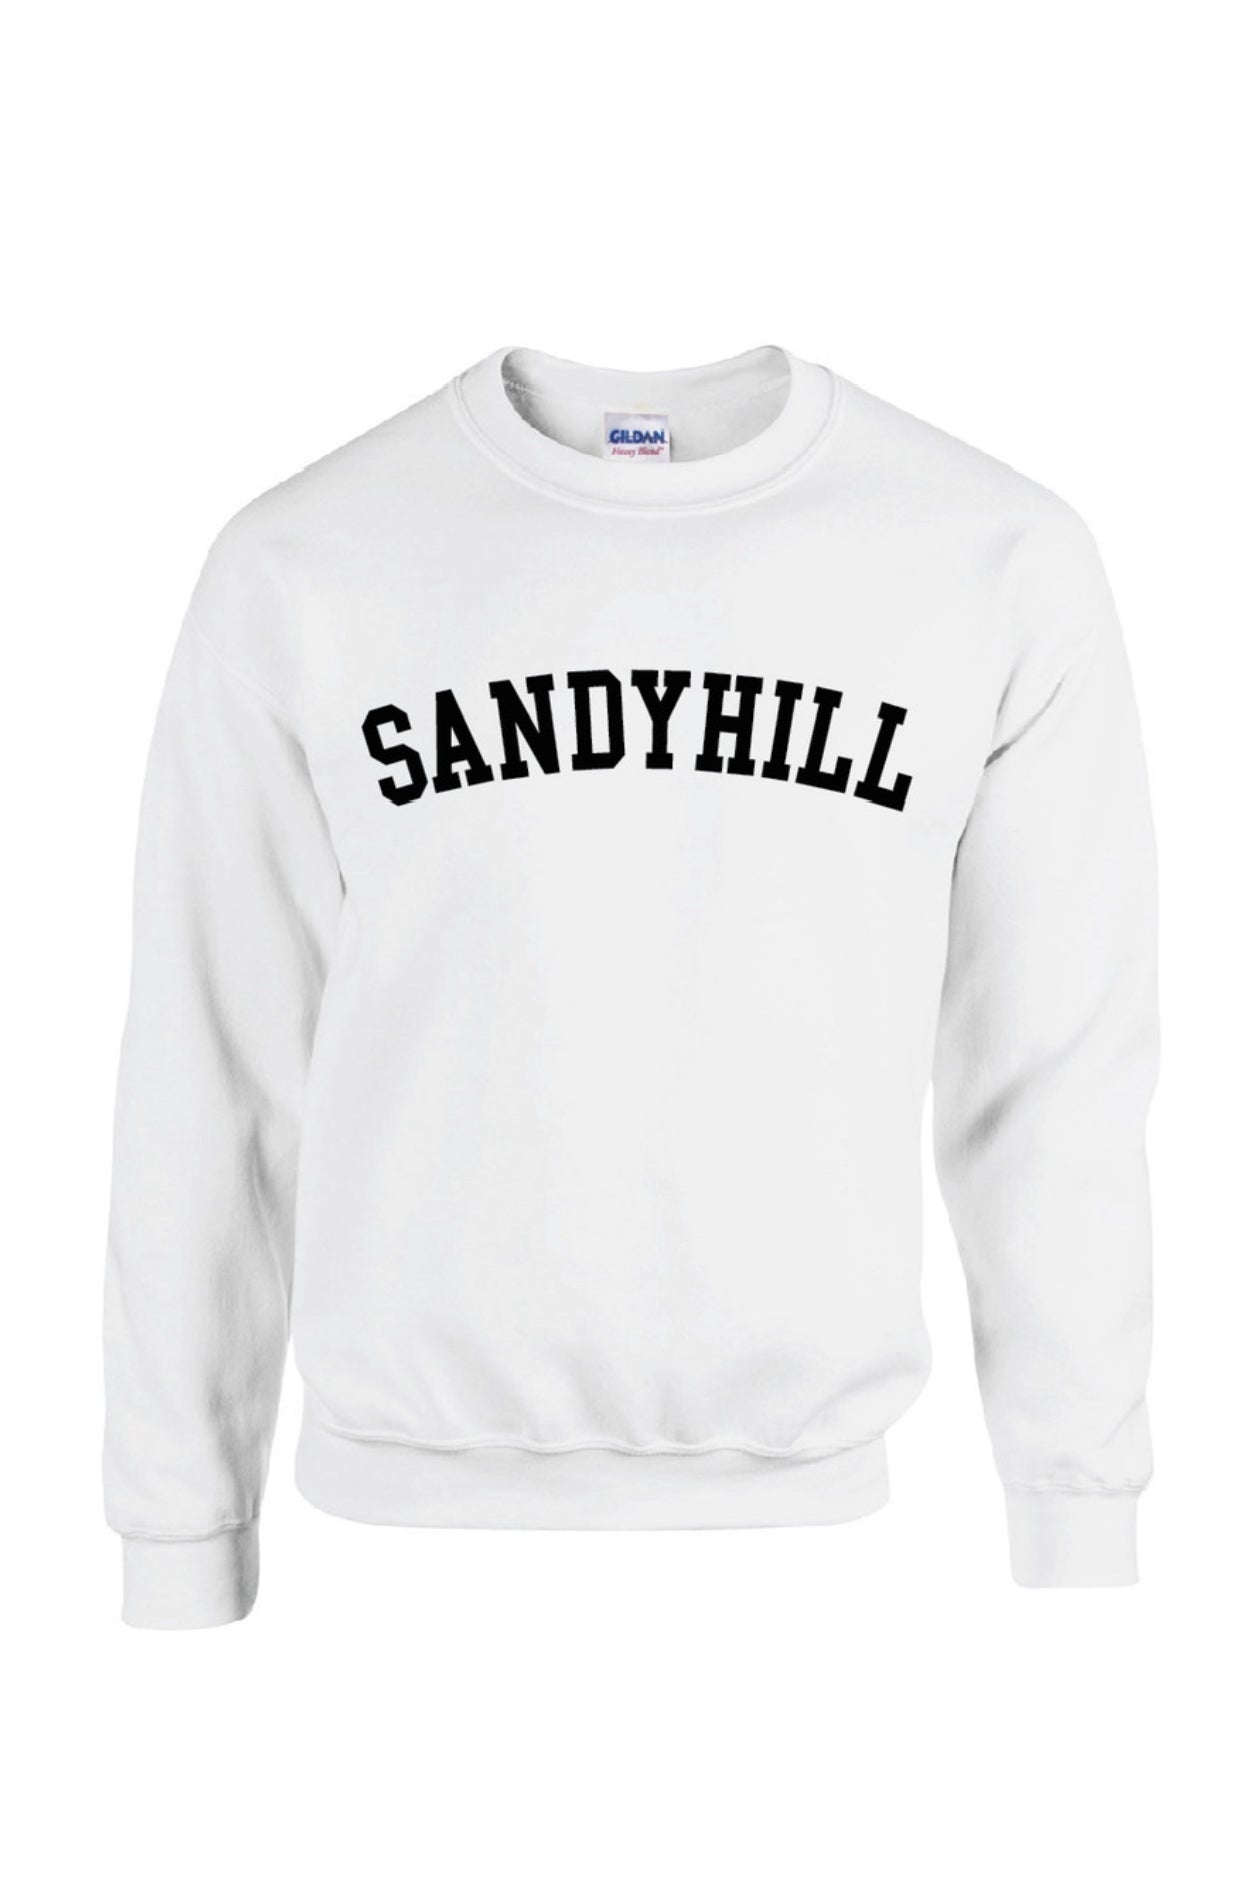 SANDYHILL CREWNECK – The Valley Candle Co.